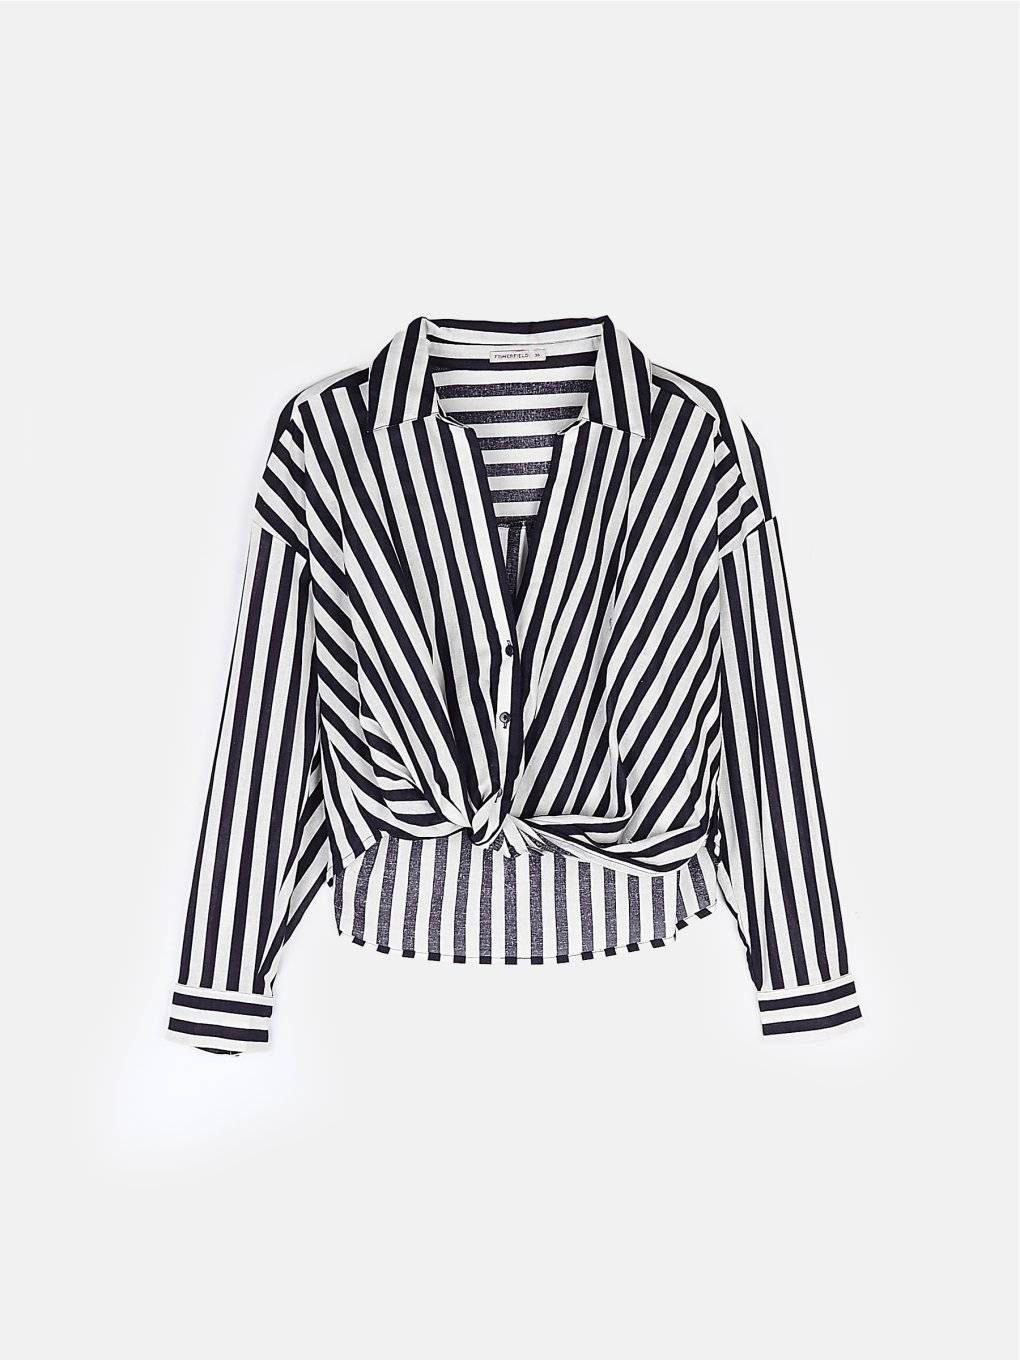 Ladies striped blouse with a knot